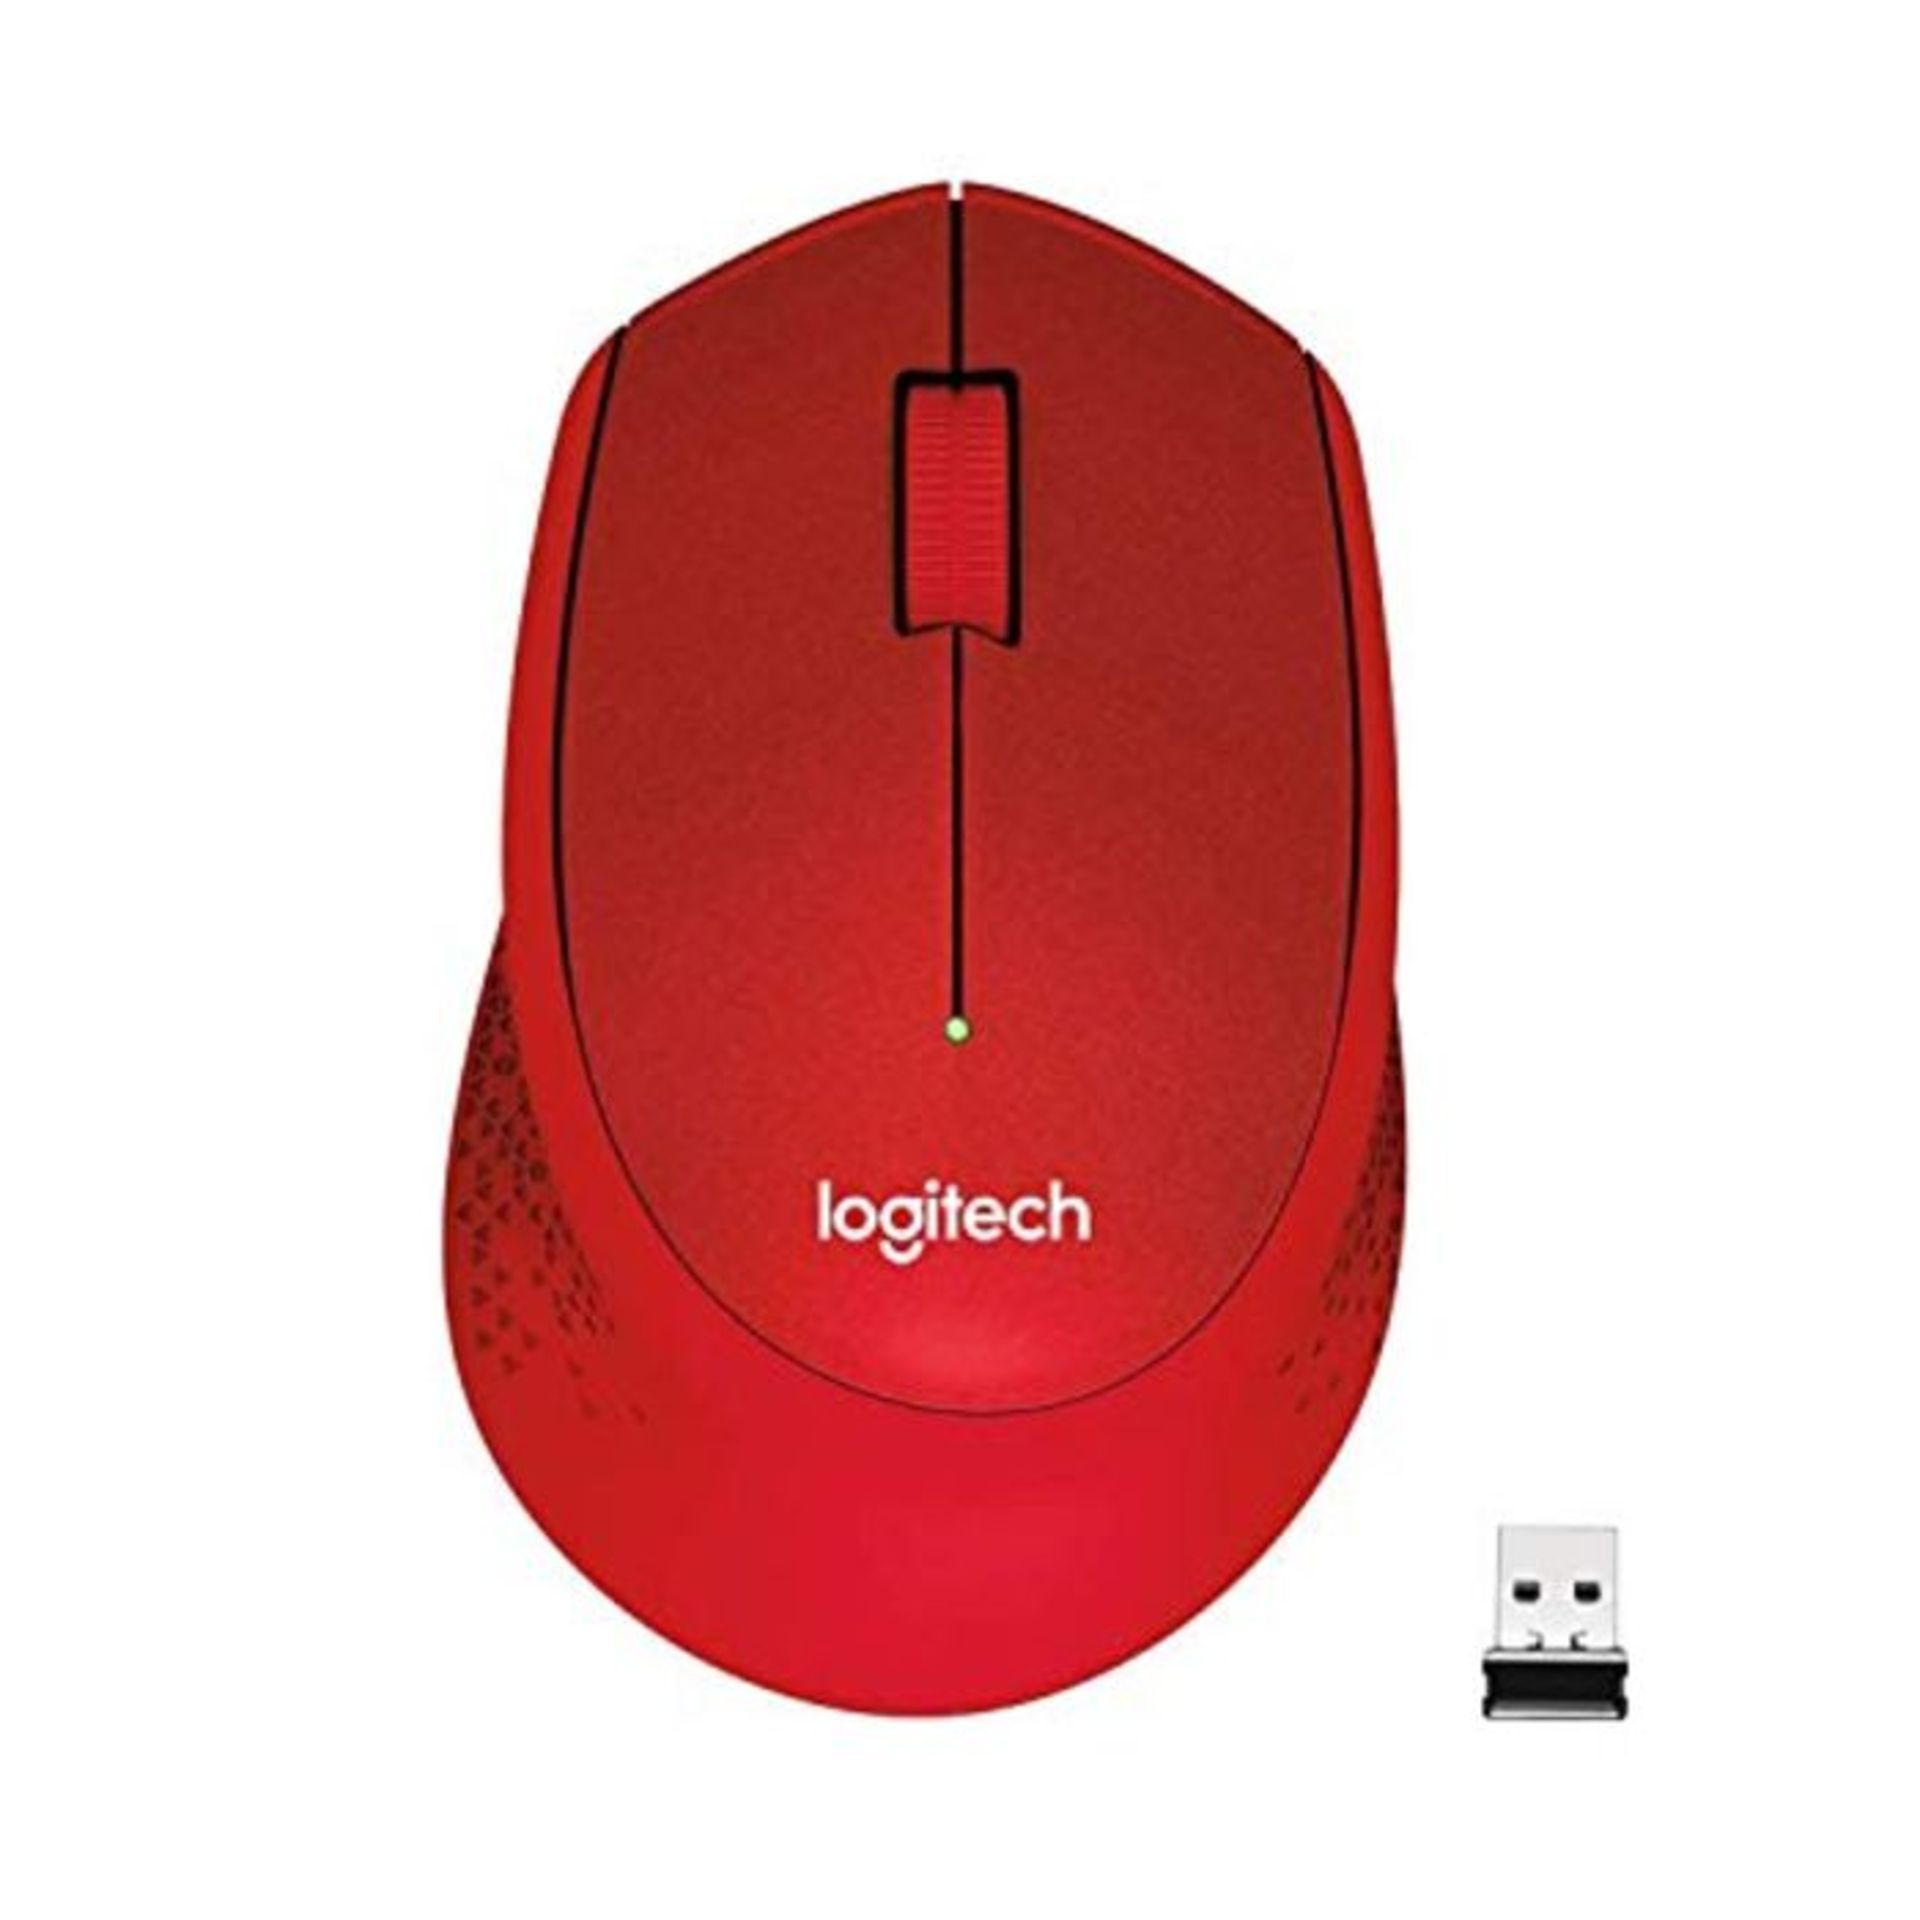 [INCOMPLETE] Logitech M330 Silent Plus Wireless Mouse, 2.4 GHz with USB Nano Receiver,